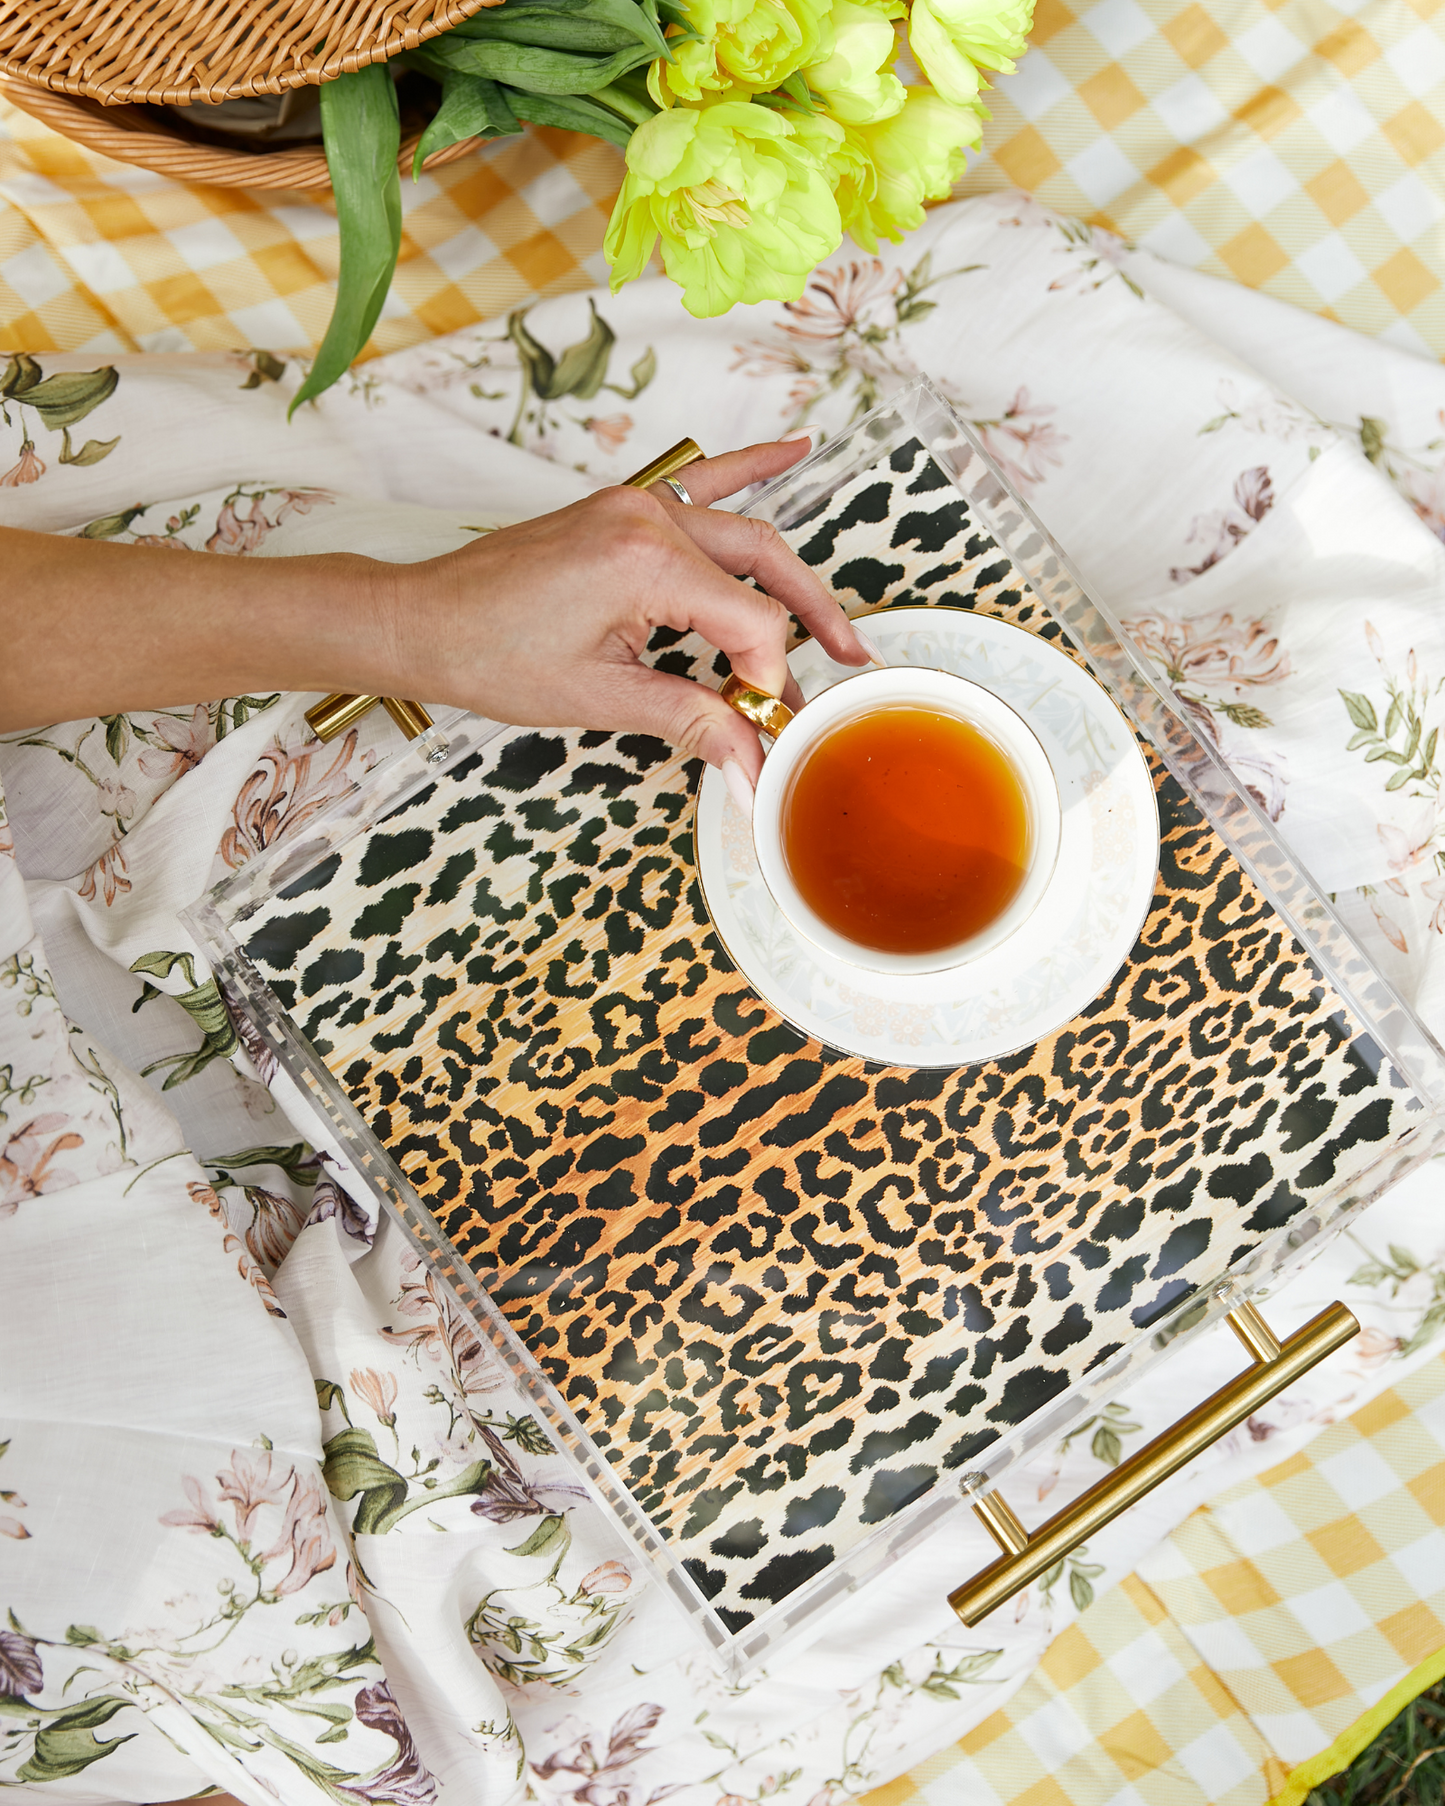 Leopard Print Large Tray